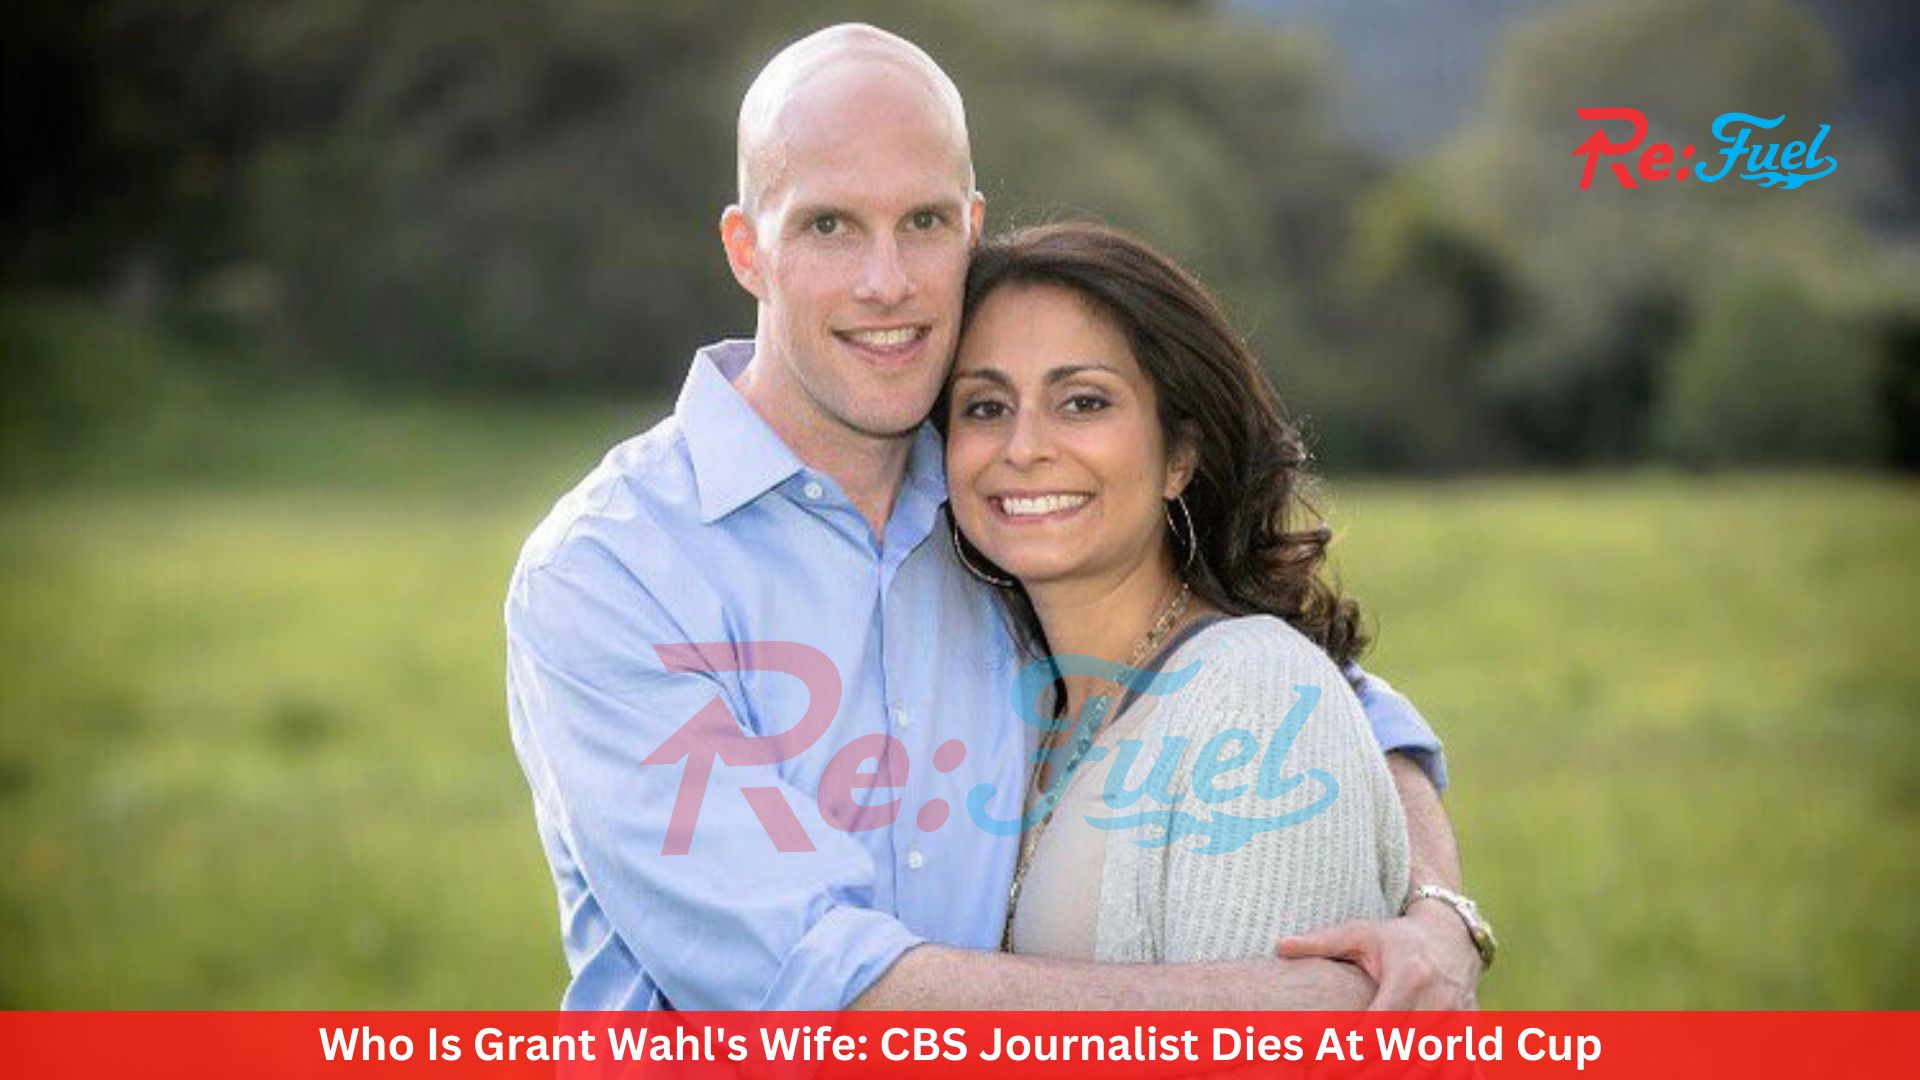 Who Is Grant Wahl's Wife: CBS Journalist Dies At World Cup